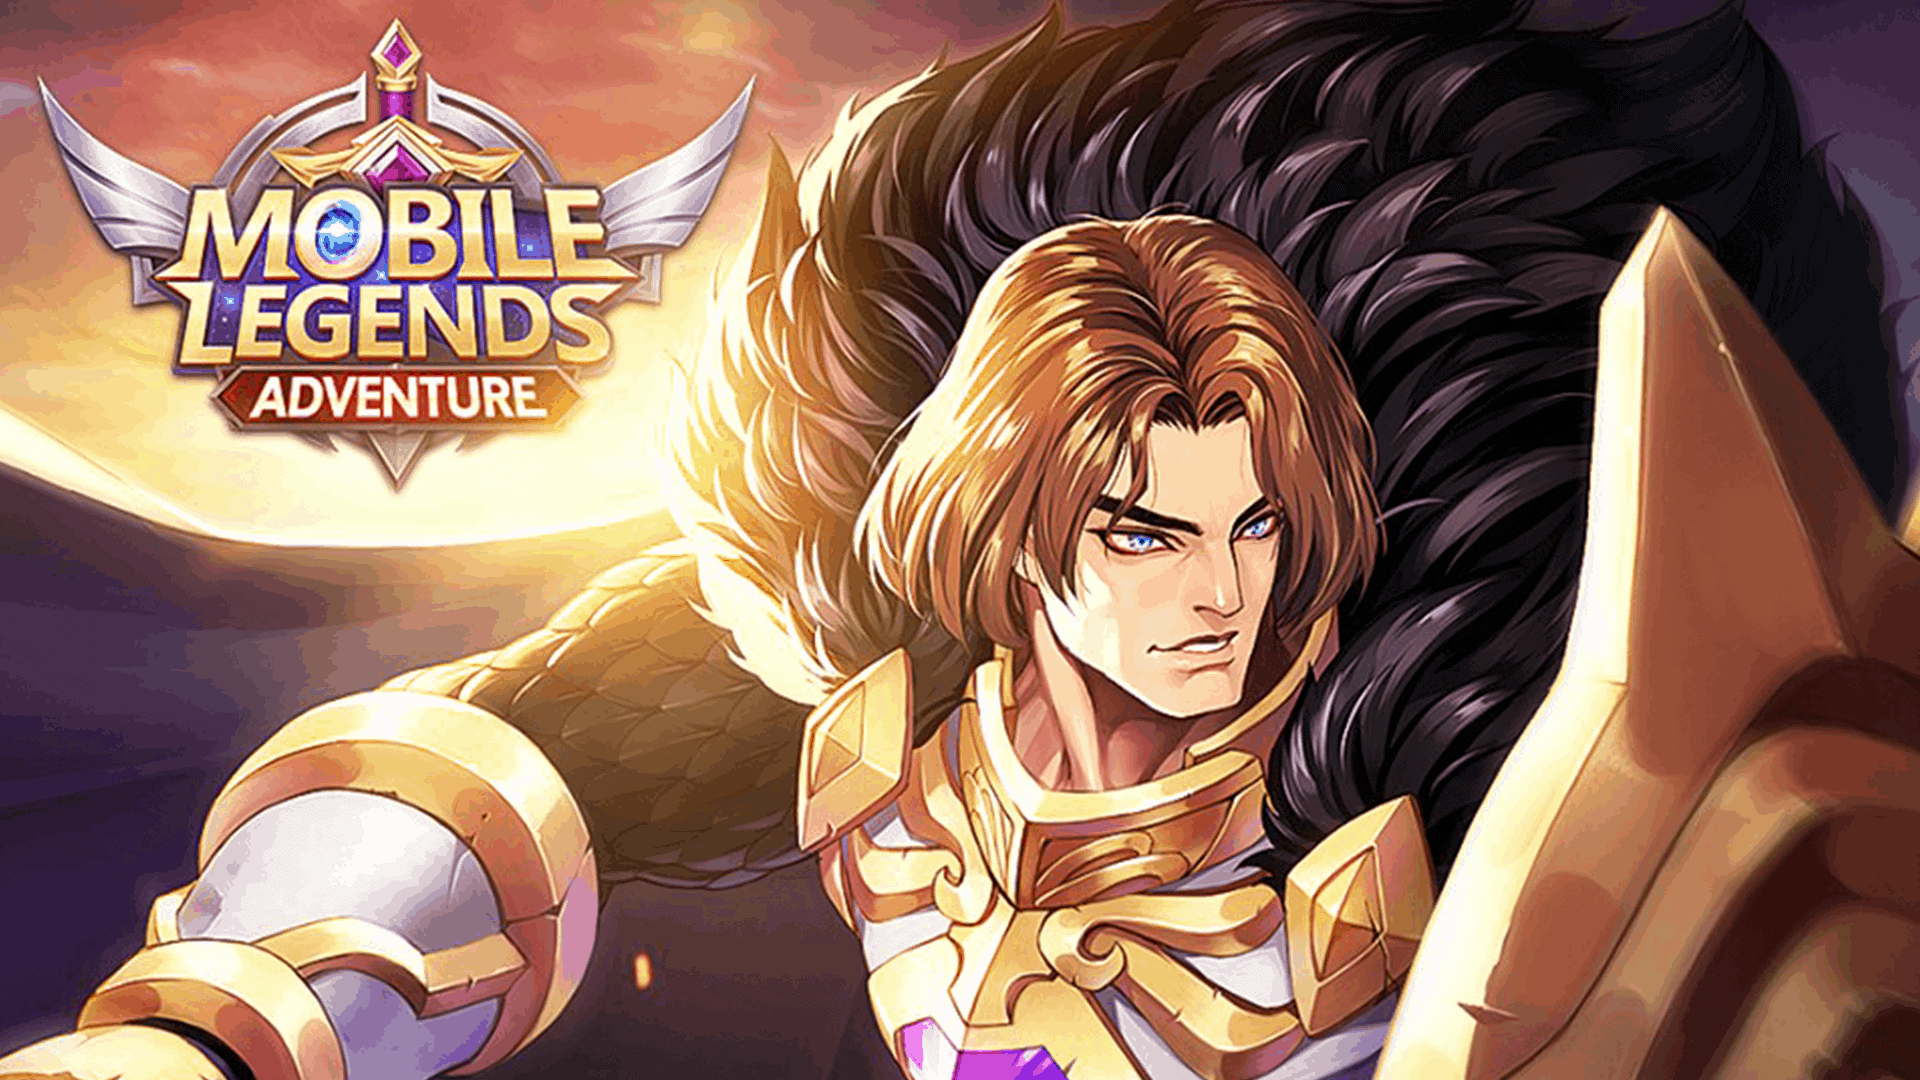 You are currently viewing Leveling & Progress Guide -Mobile Legends: Adventure